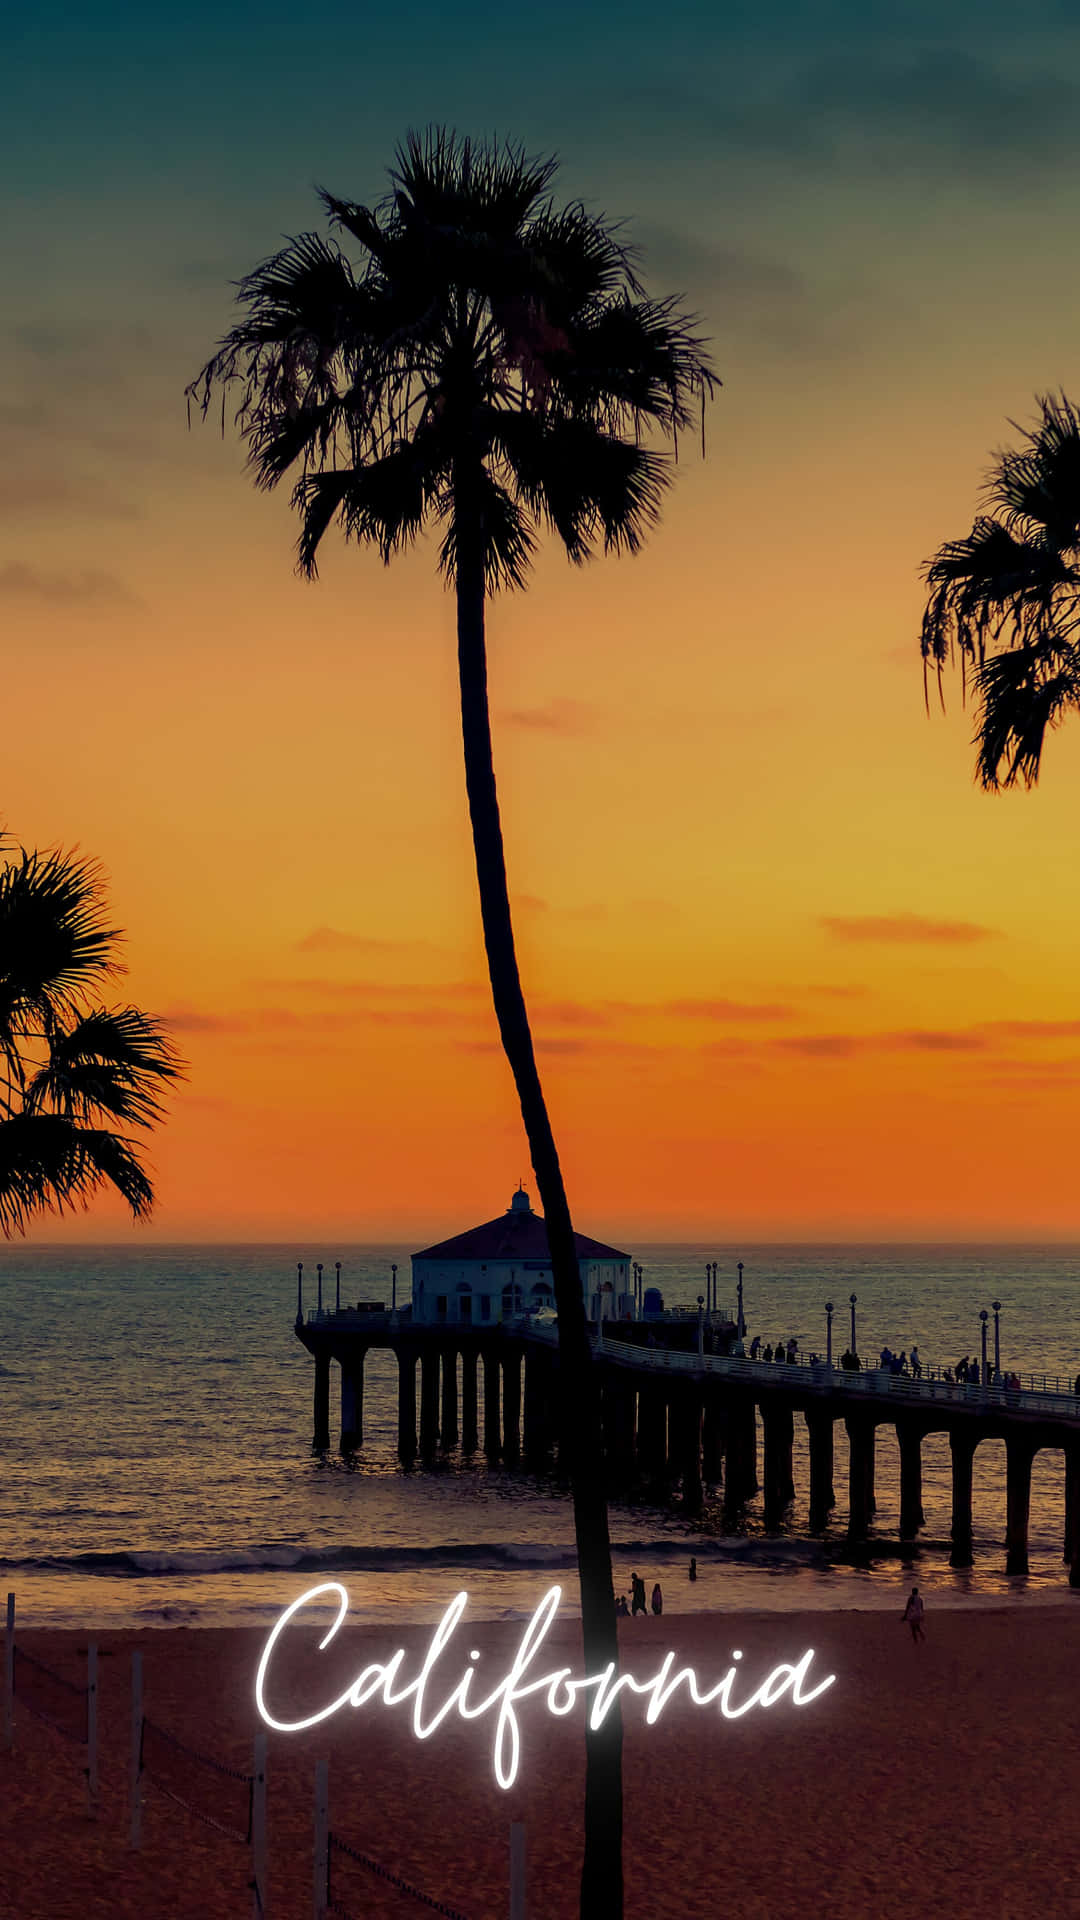 Let the sun set on a perfect day in California. Wallpaper